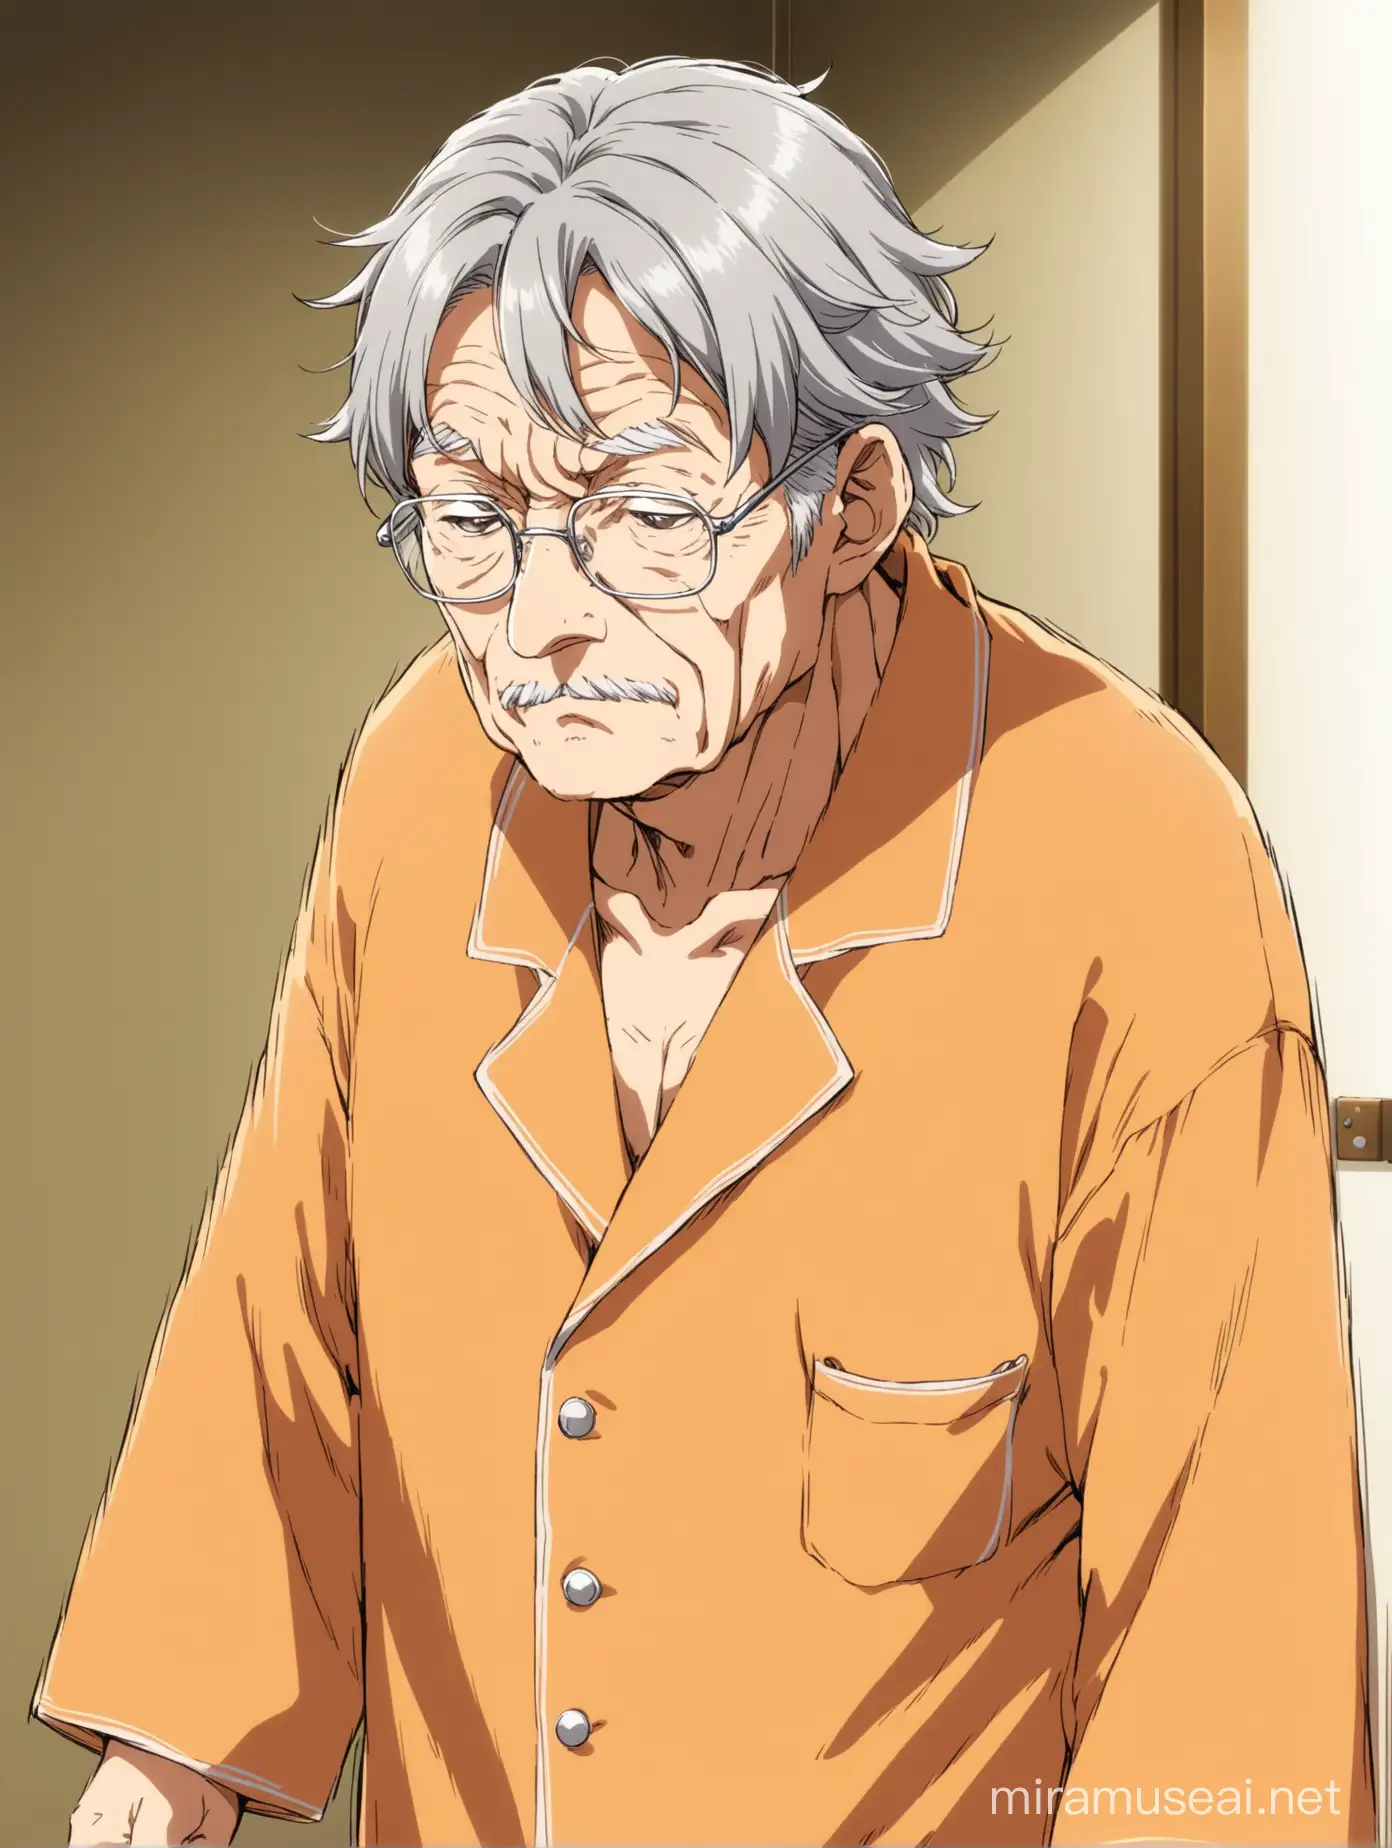 Elderly Anime Character with Gray Wavy Hair in Light Orange Pajamas and Silver Glasses